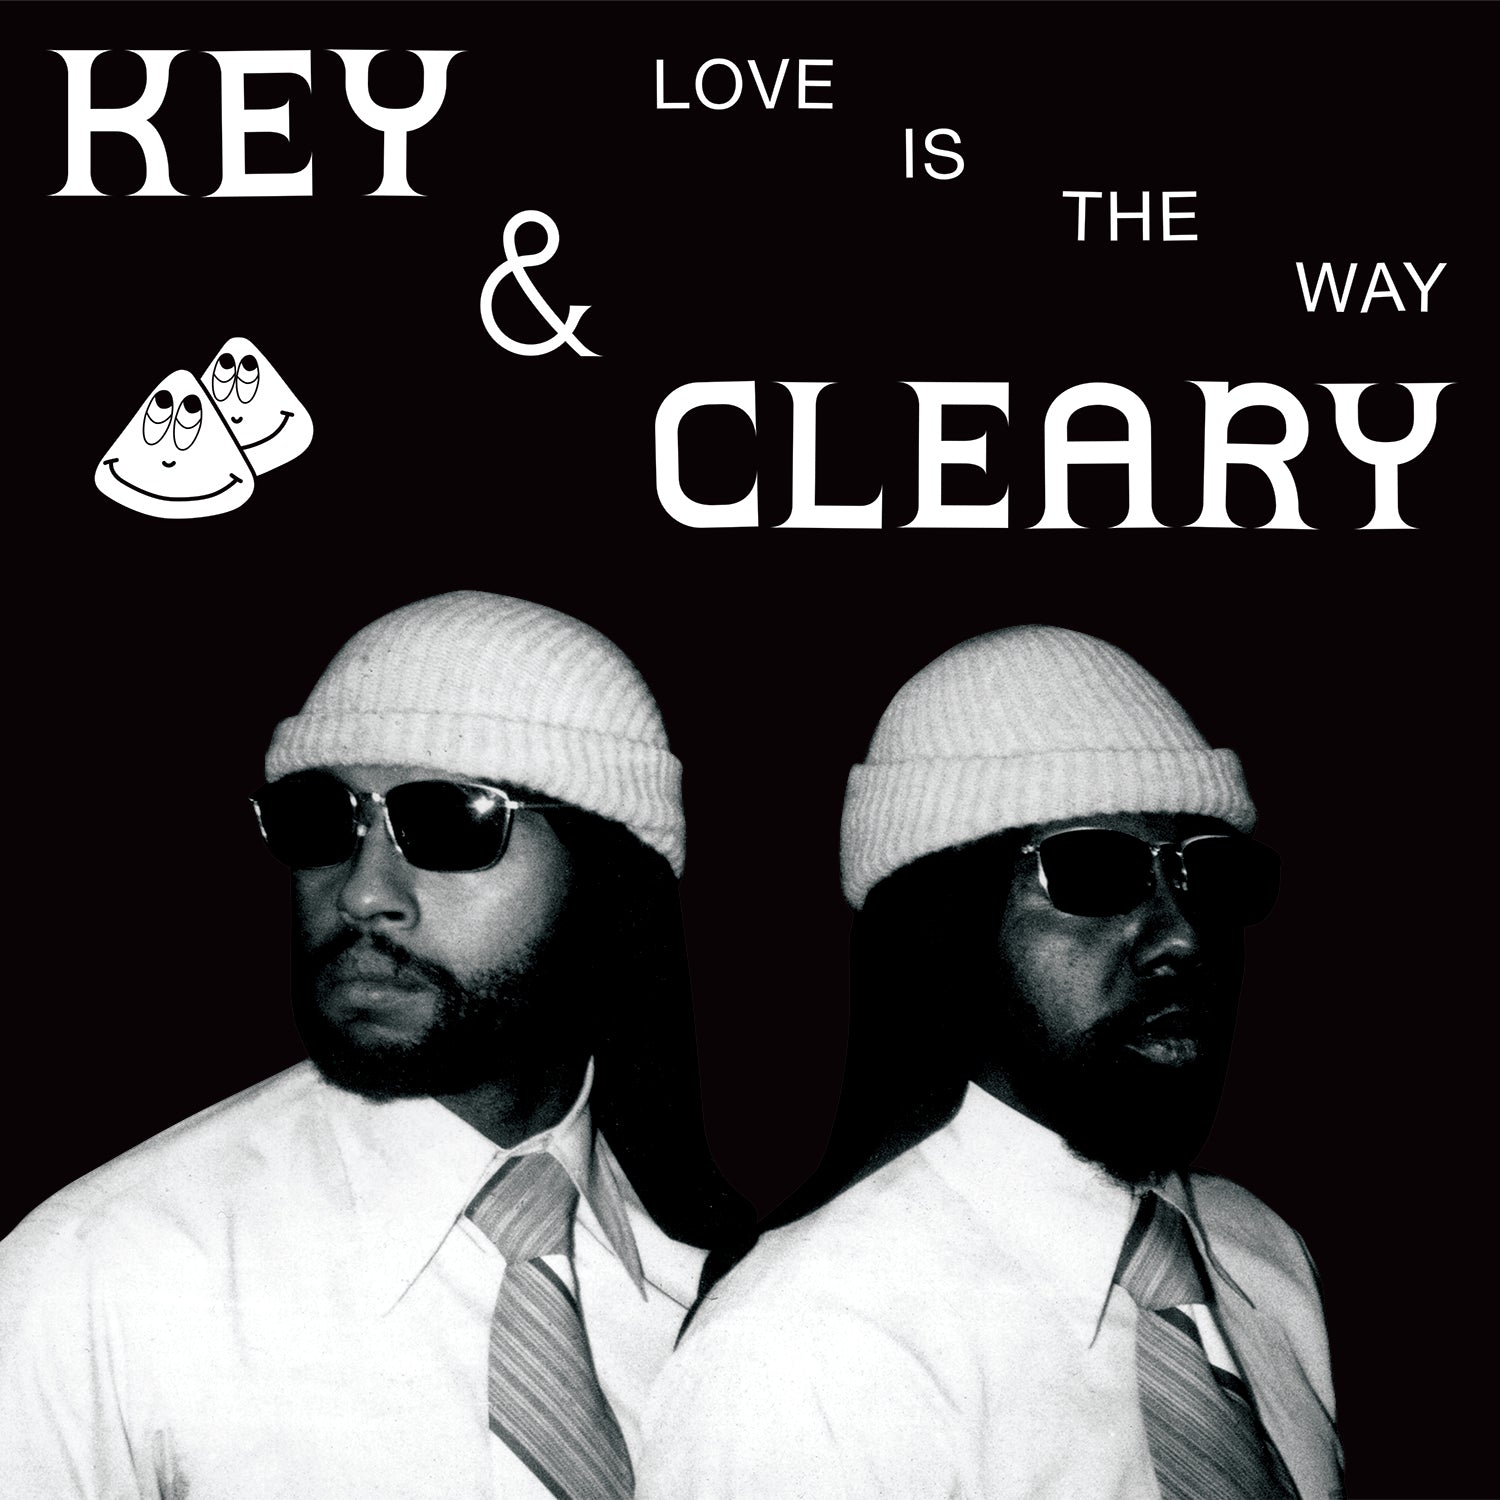 Key & Cleary - Love is the Way